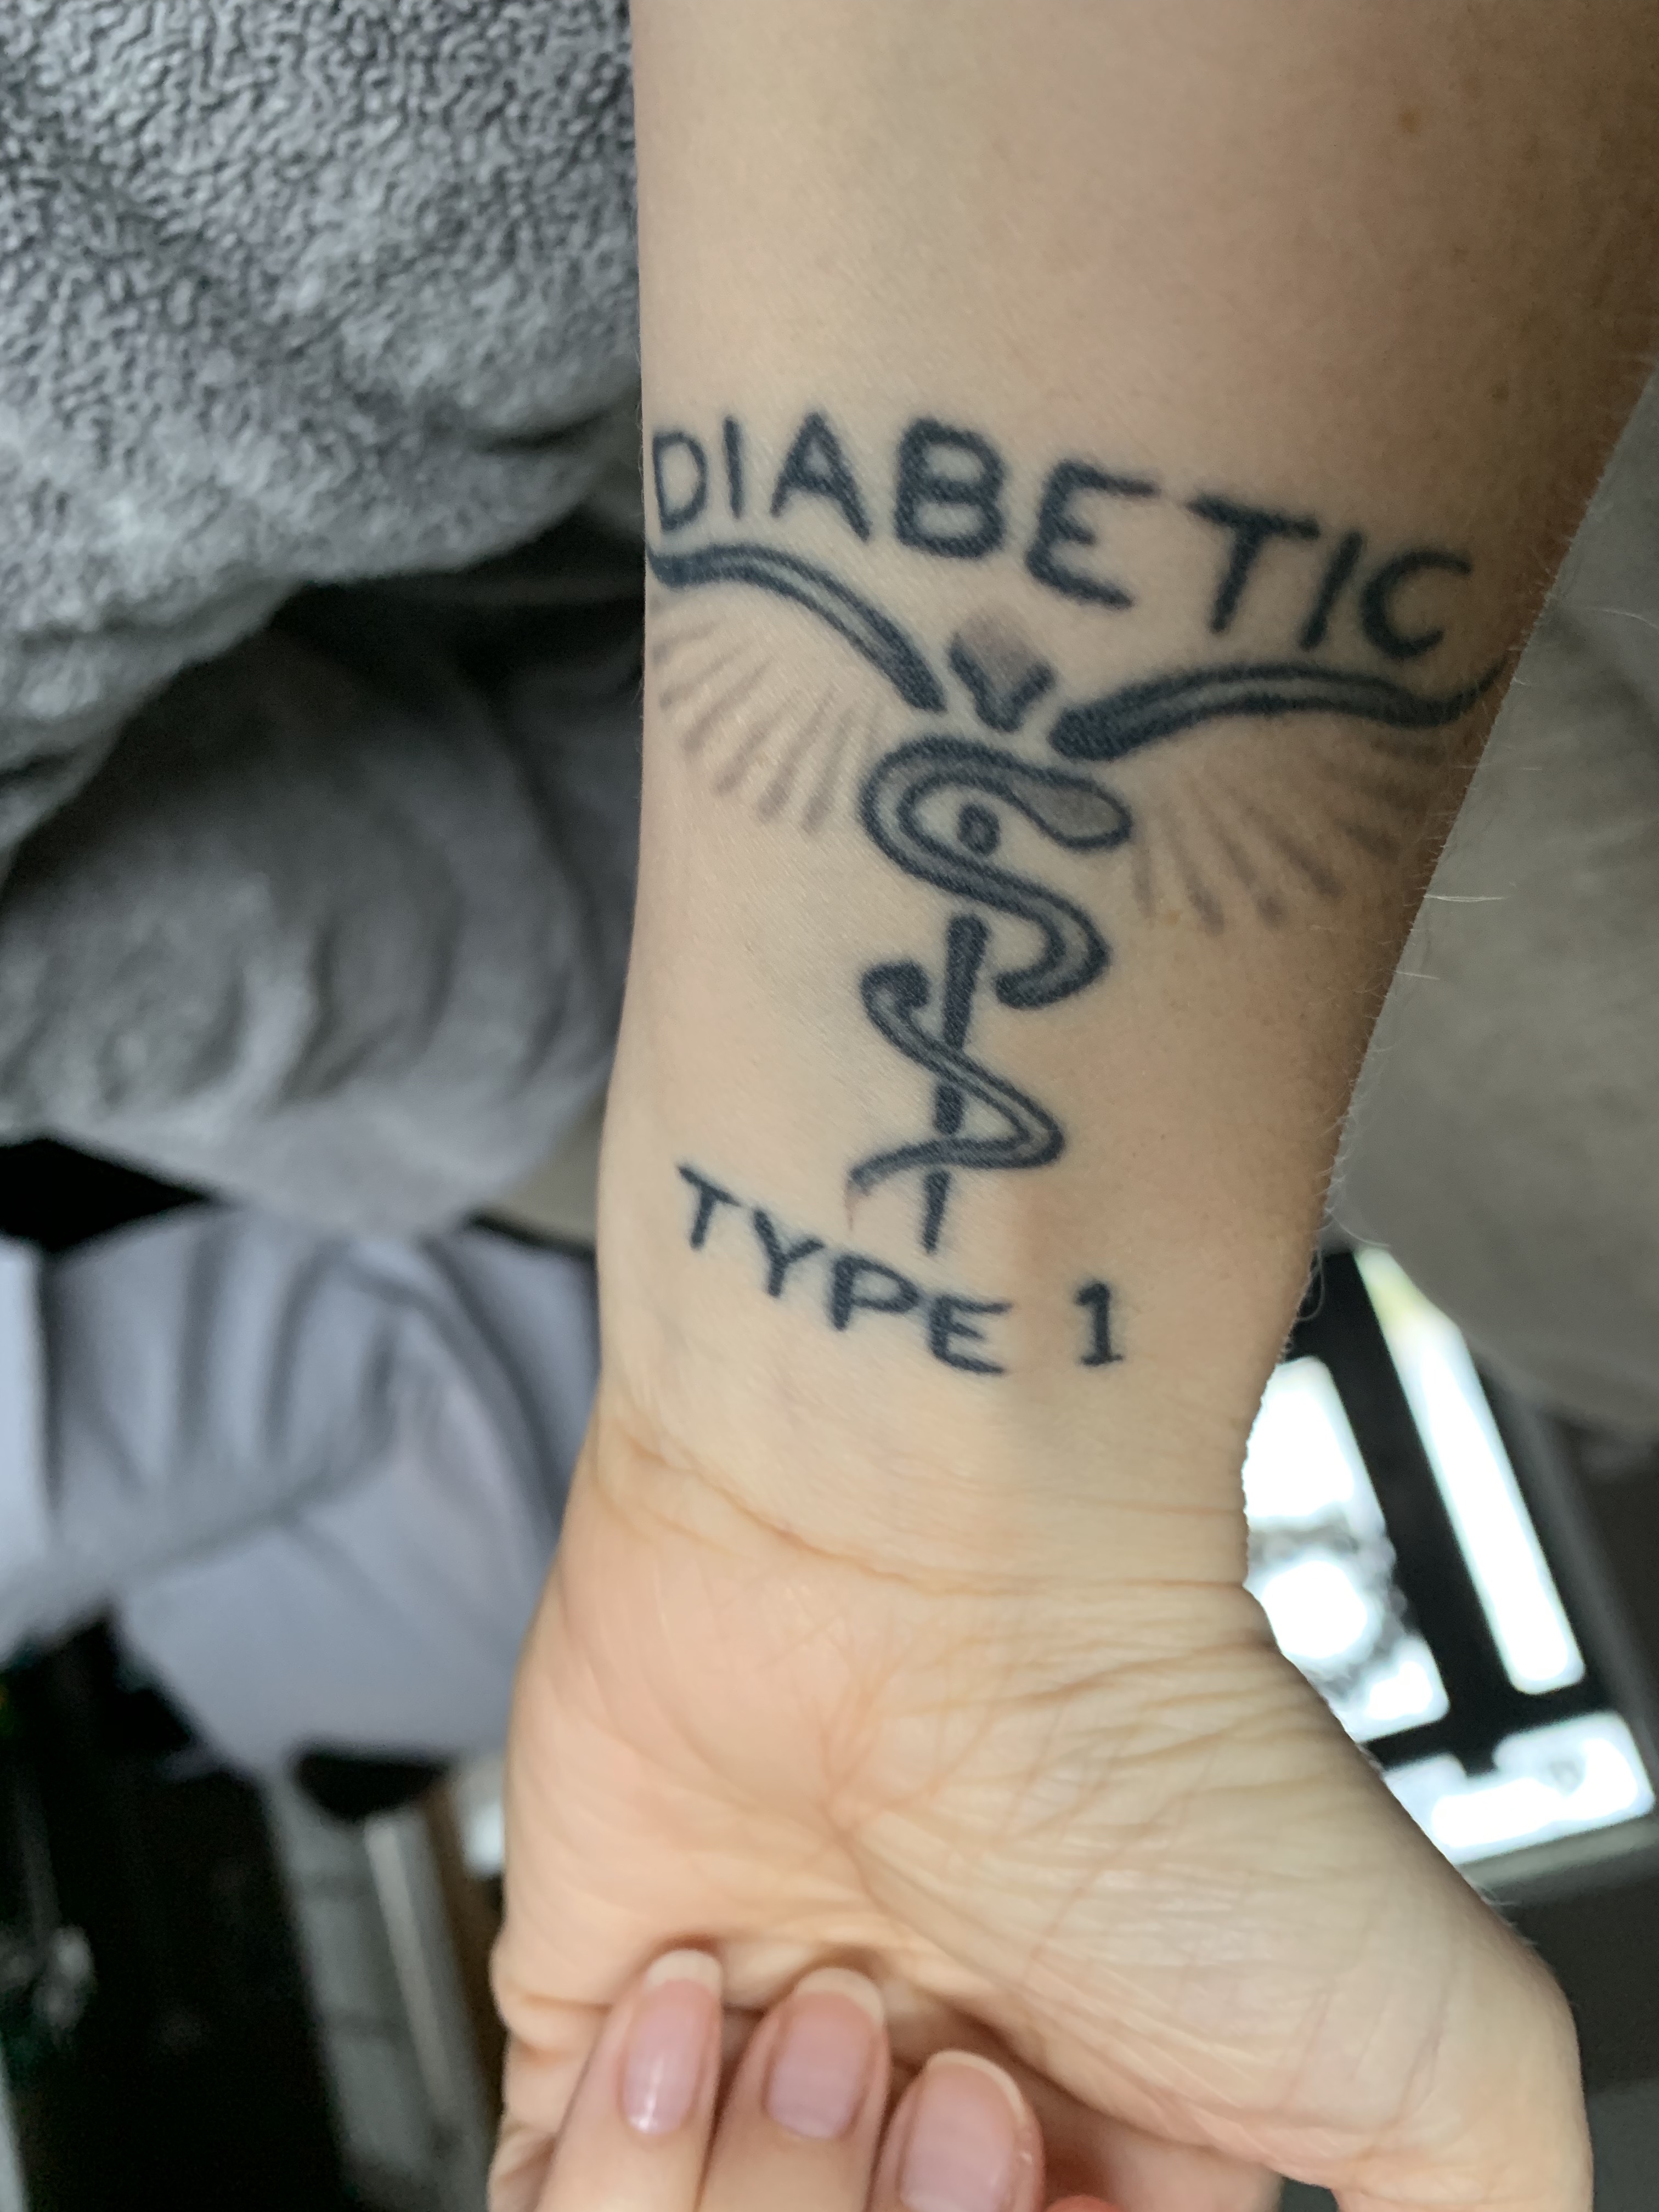 Diabetes and Tattoos  Share Your Stories  TuDiabetes Forum